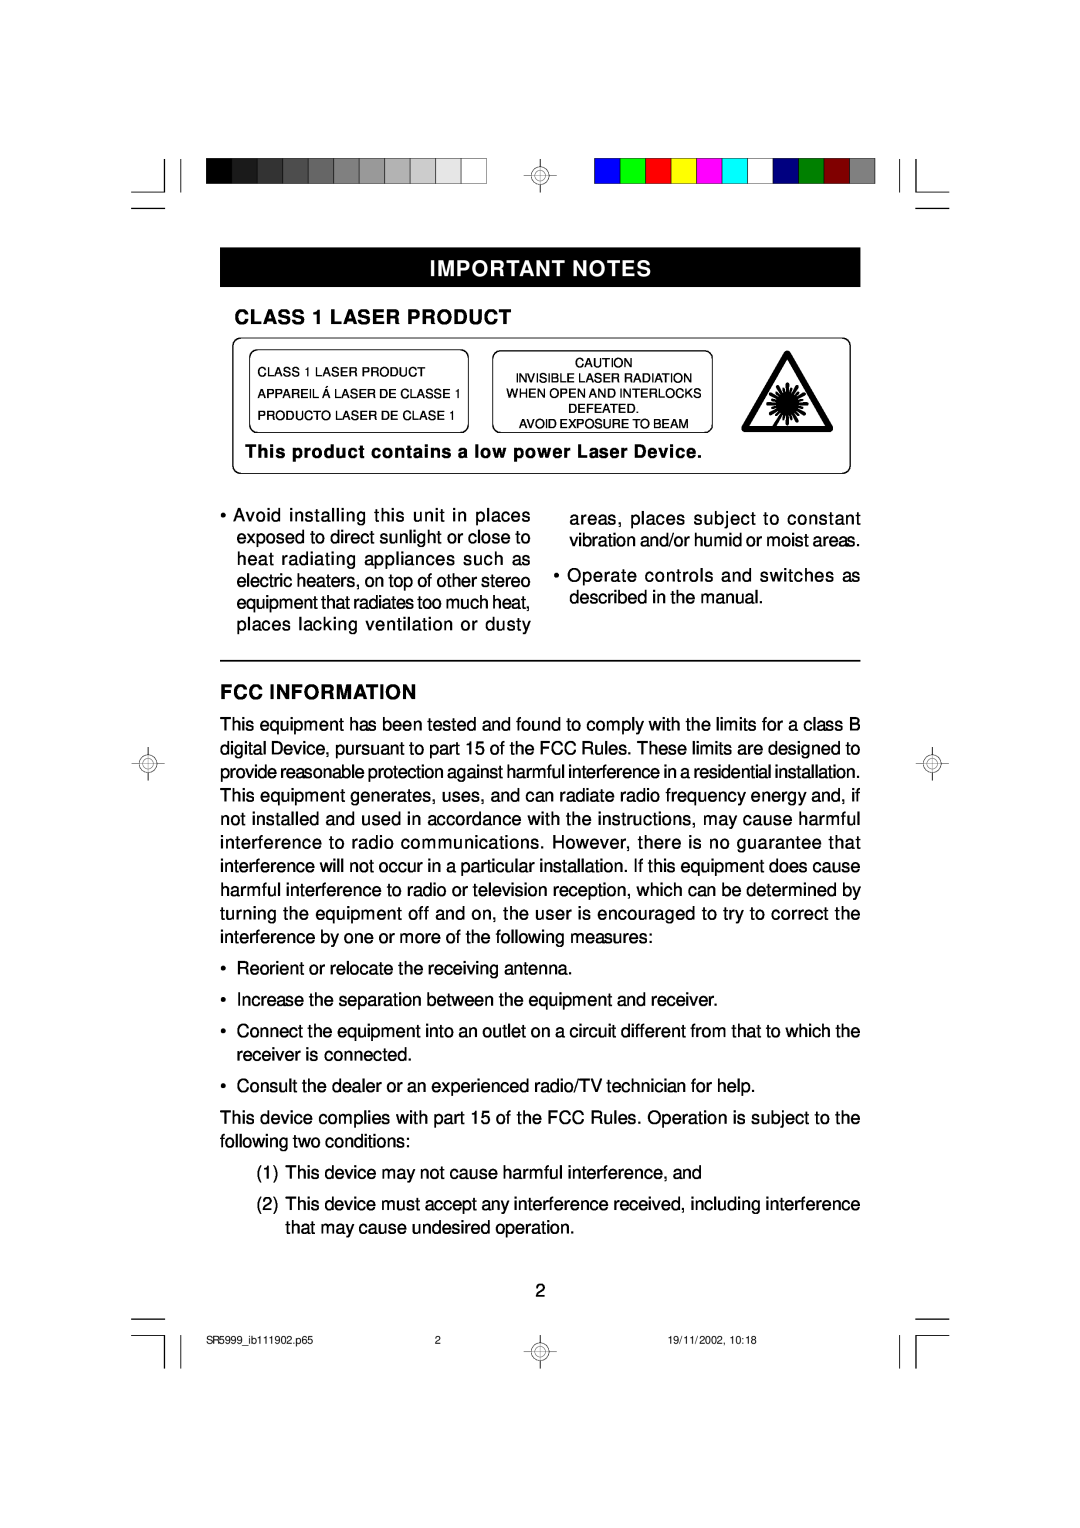 Emerson SR5999 Important Notes, CLASS 1 LASER PRODUCT, Fcc Information, This product contains a low power Laser Device 